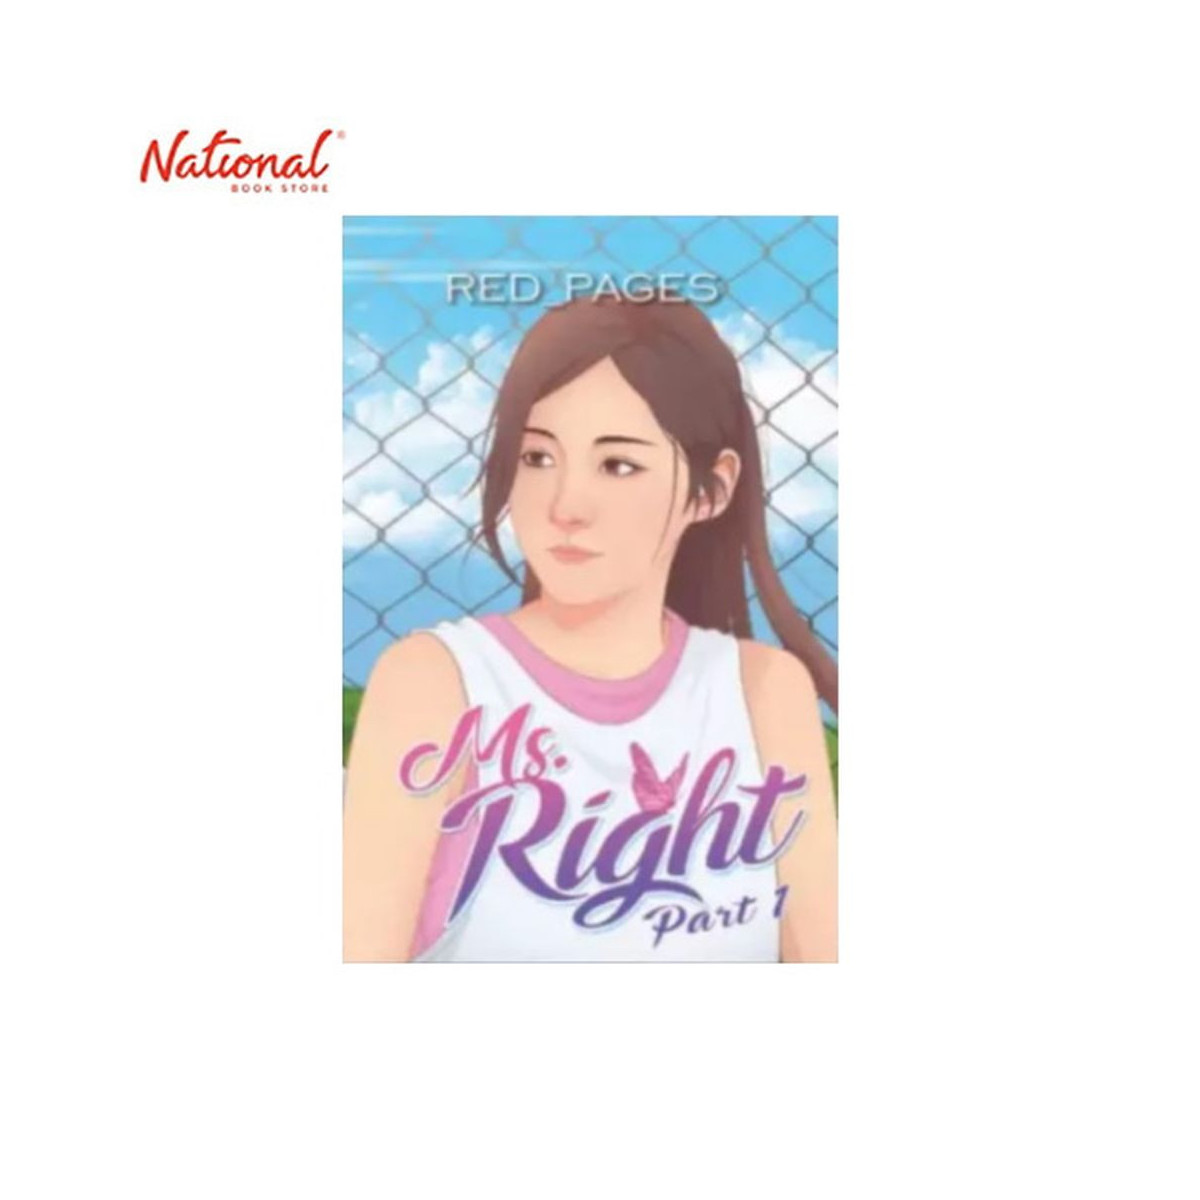 Mr. Right Part 1 Trade Paperback By Red_Pages